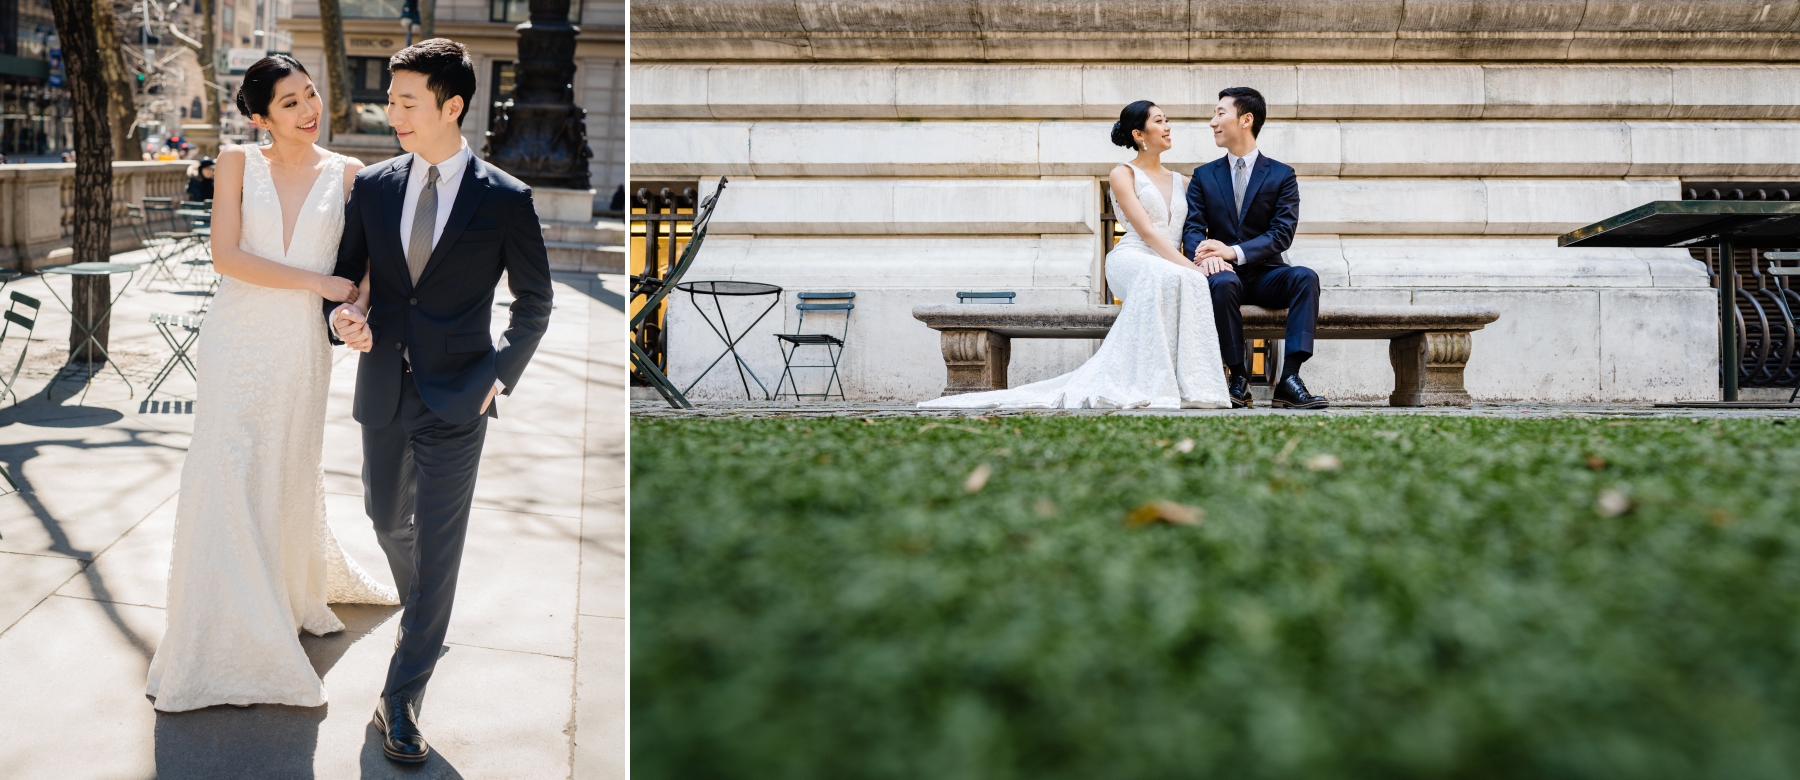  images from my styled shoot, partnering with the following vendors: Jenny Yoo NYC Bridal, AKA Cedric Salon, Mariana Collignon (Makeup), as well as Location05 for our venue, and Gary Feng Videography. Photos were taken first at Cedric's salon, then a